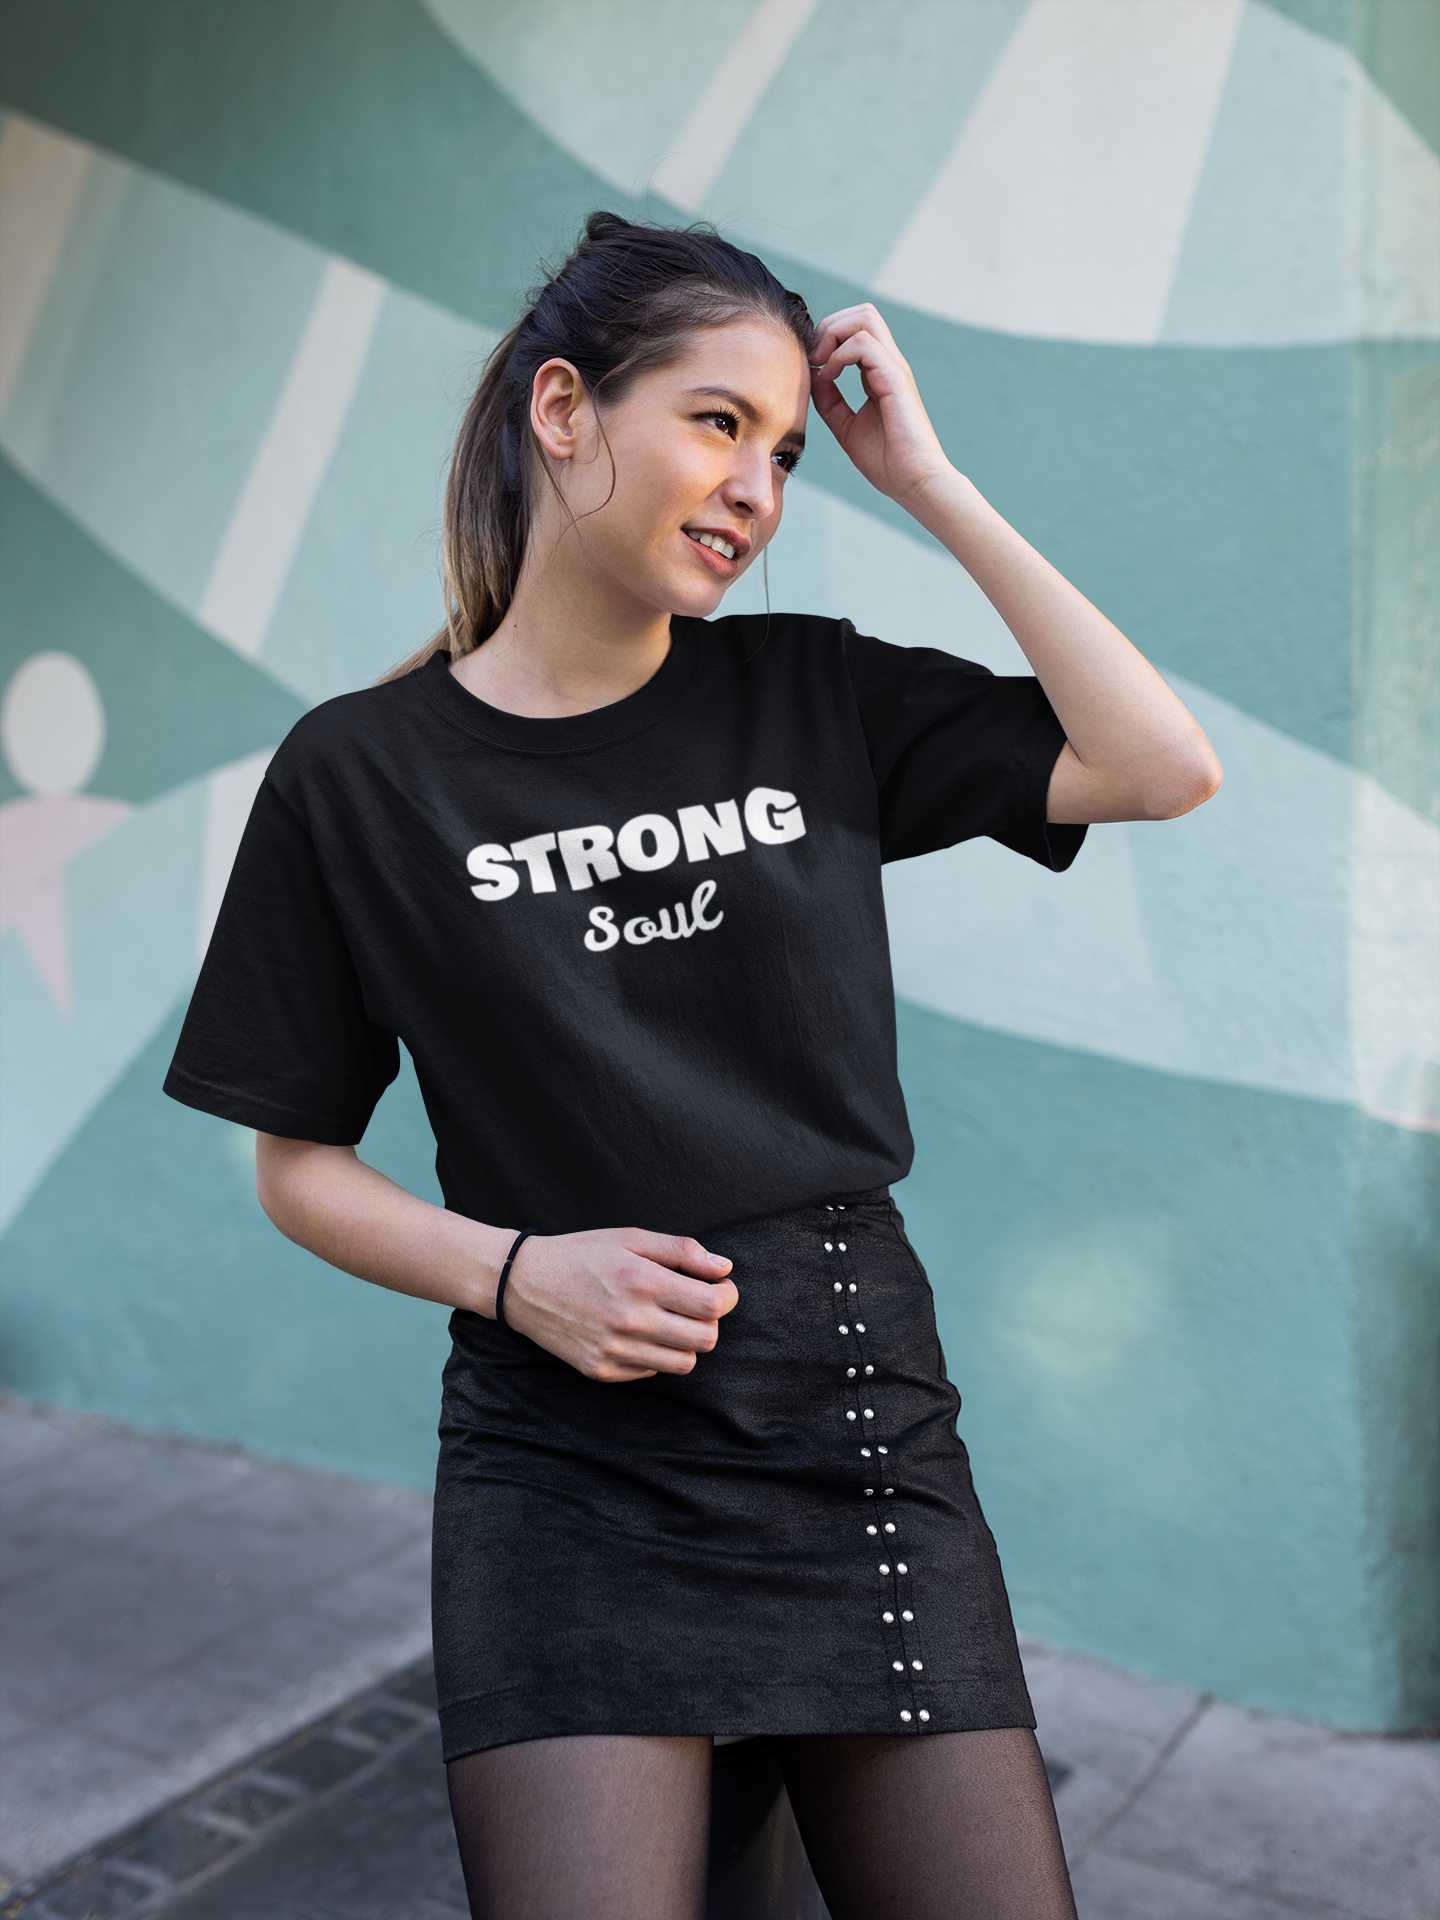 Strong Soul - Oversized T Shirt Strong Soul Shirts & Tops